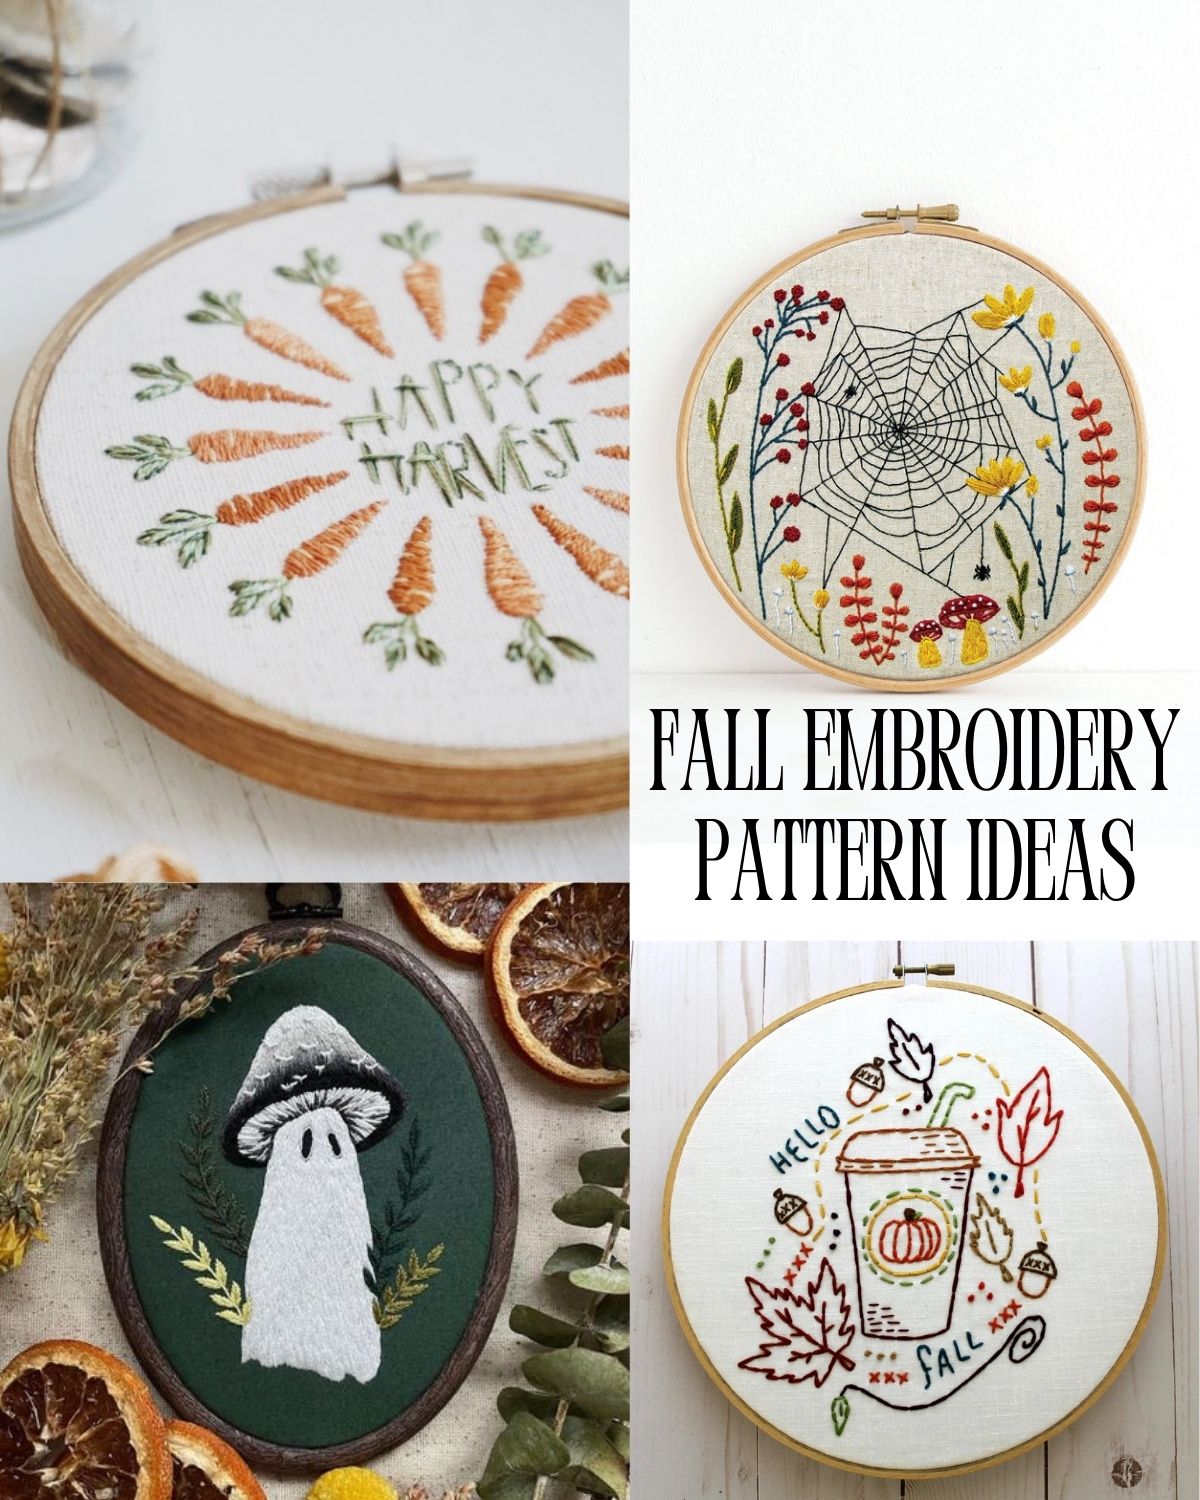 Four embroidery images of cute fall images